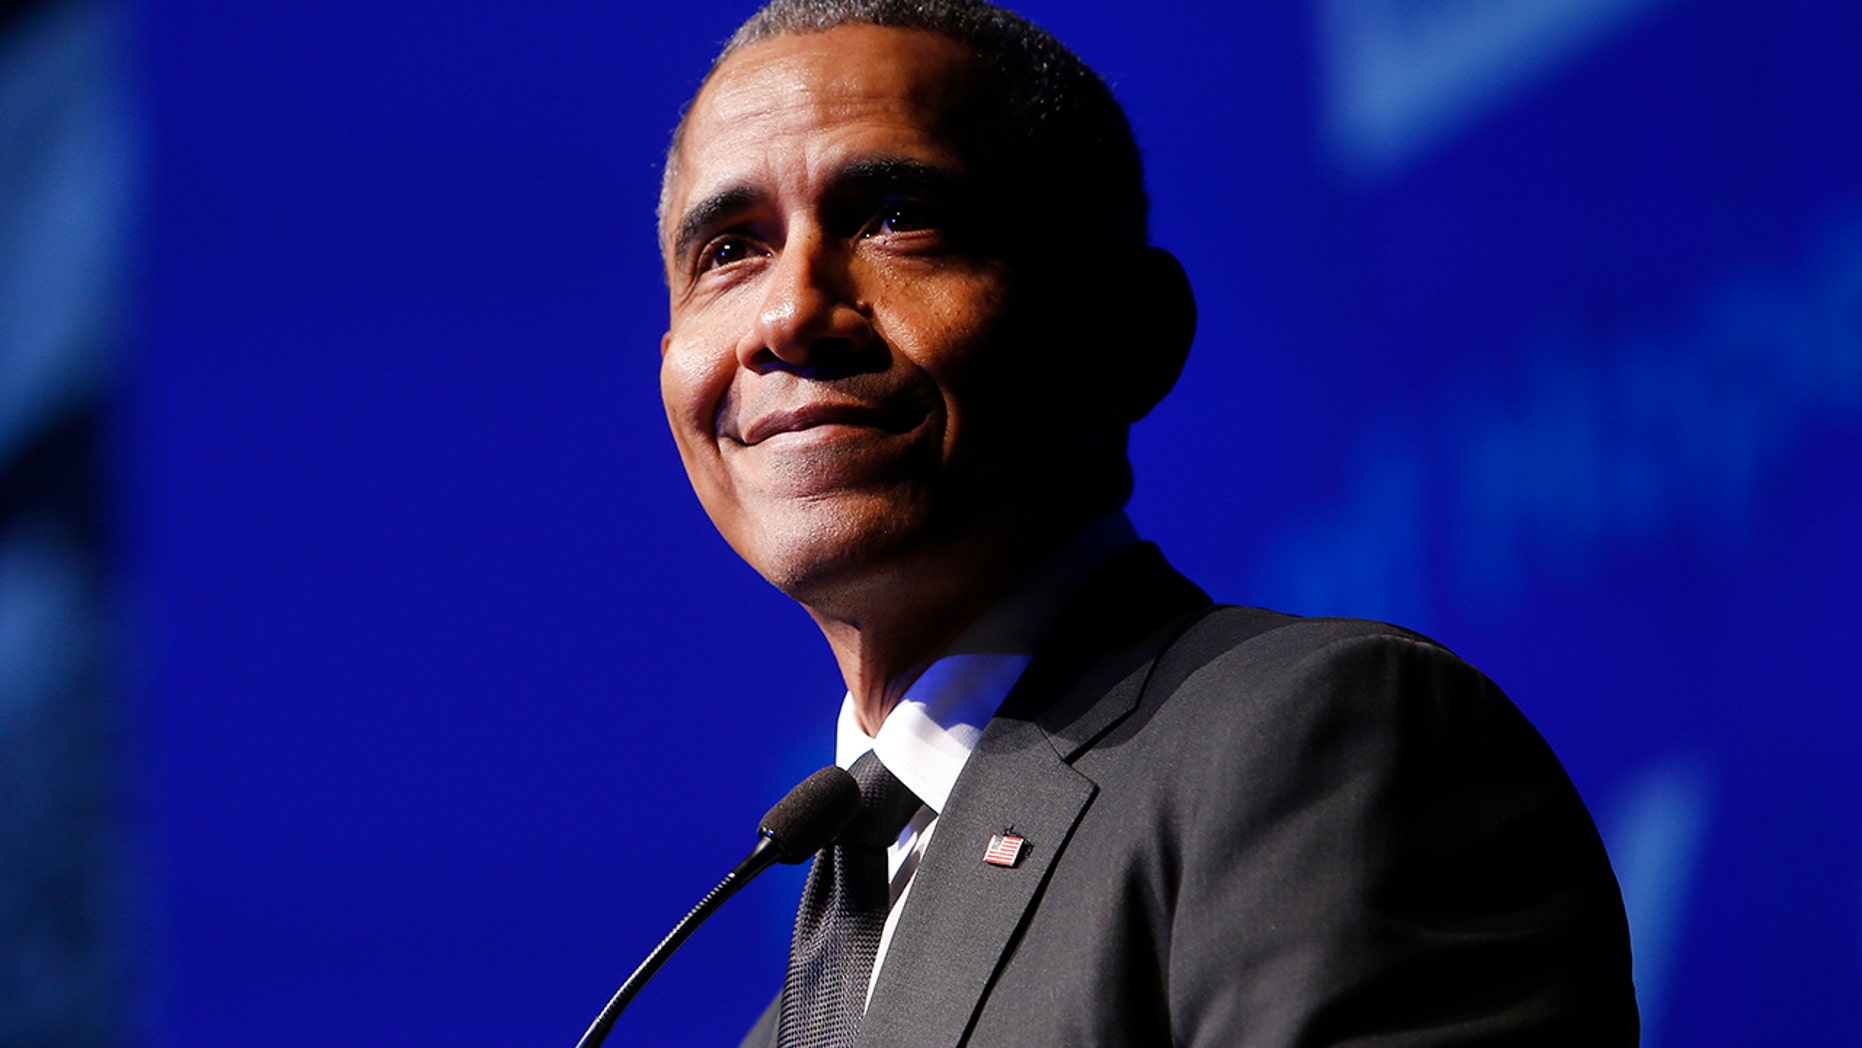 Obama makes debuts on Billboard chart with 